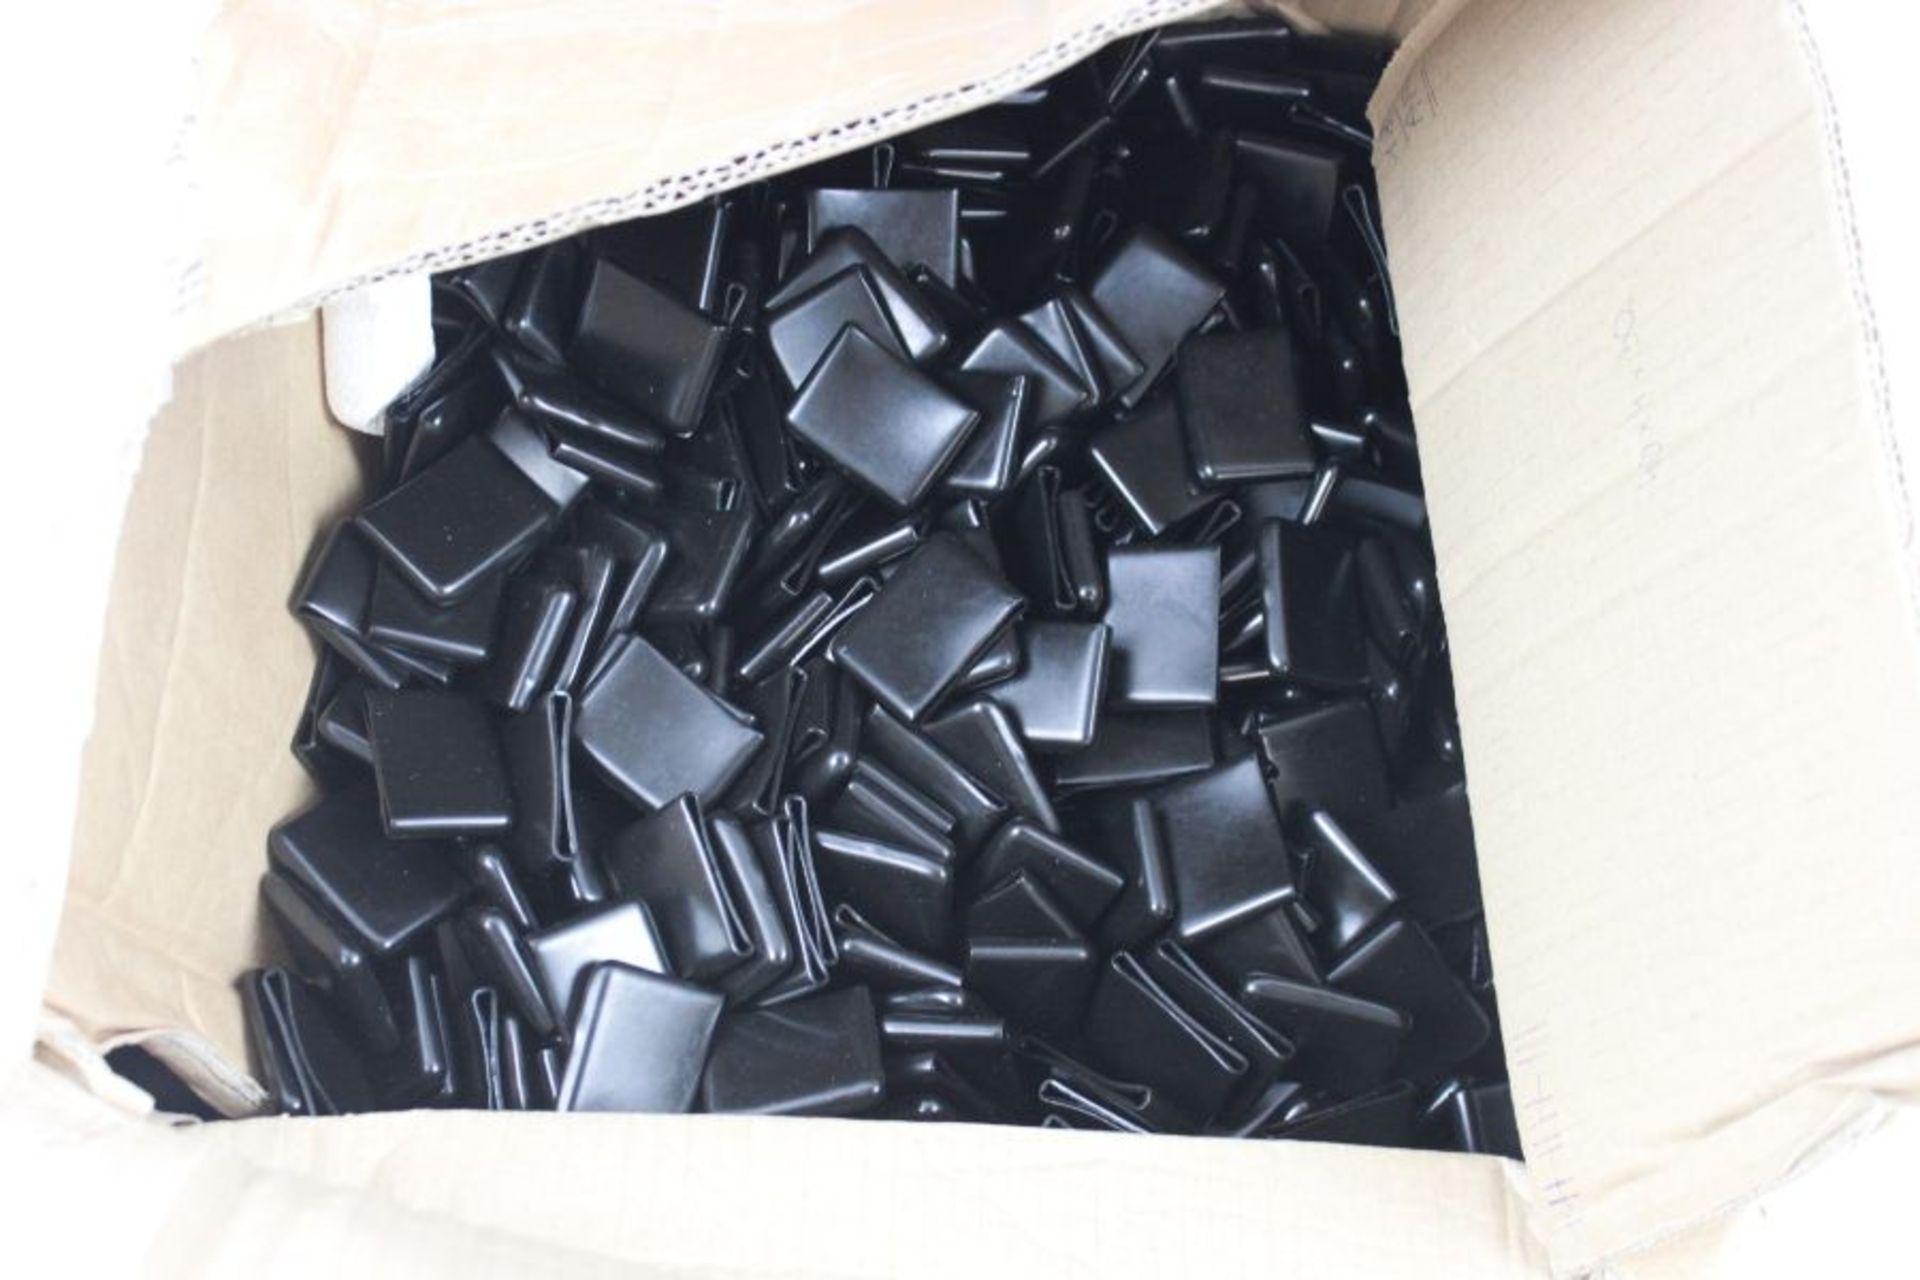 Approximately One Thousand and Eighty Vinyl Plastic Sleeves, 40x4x30 mm